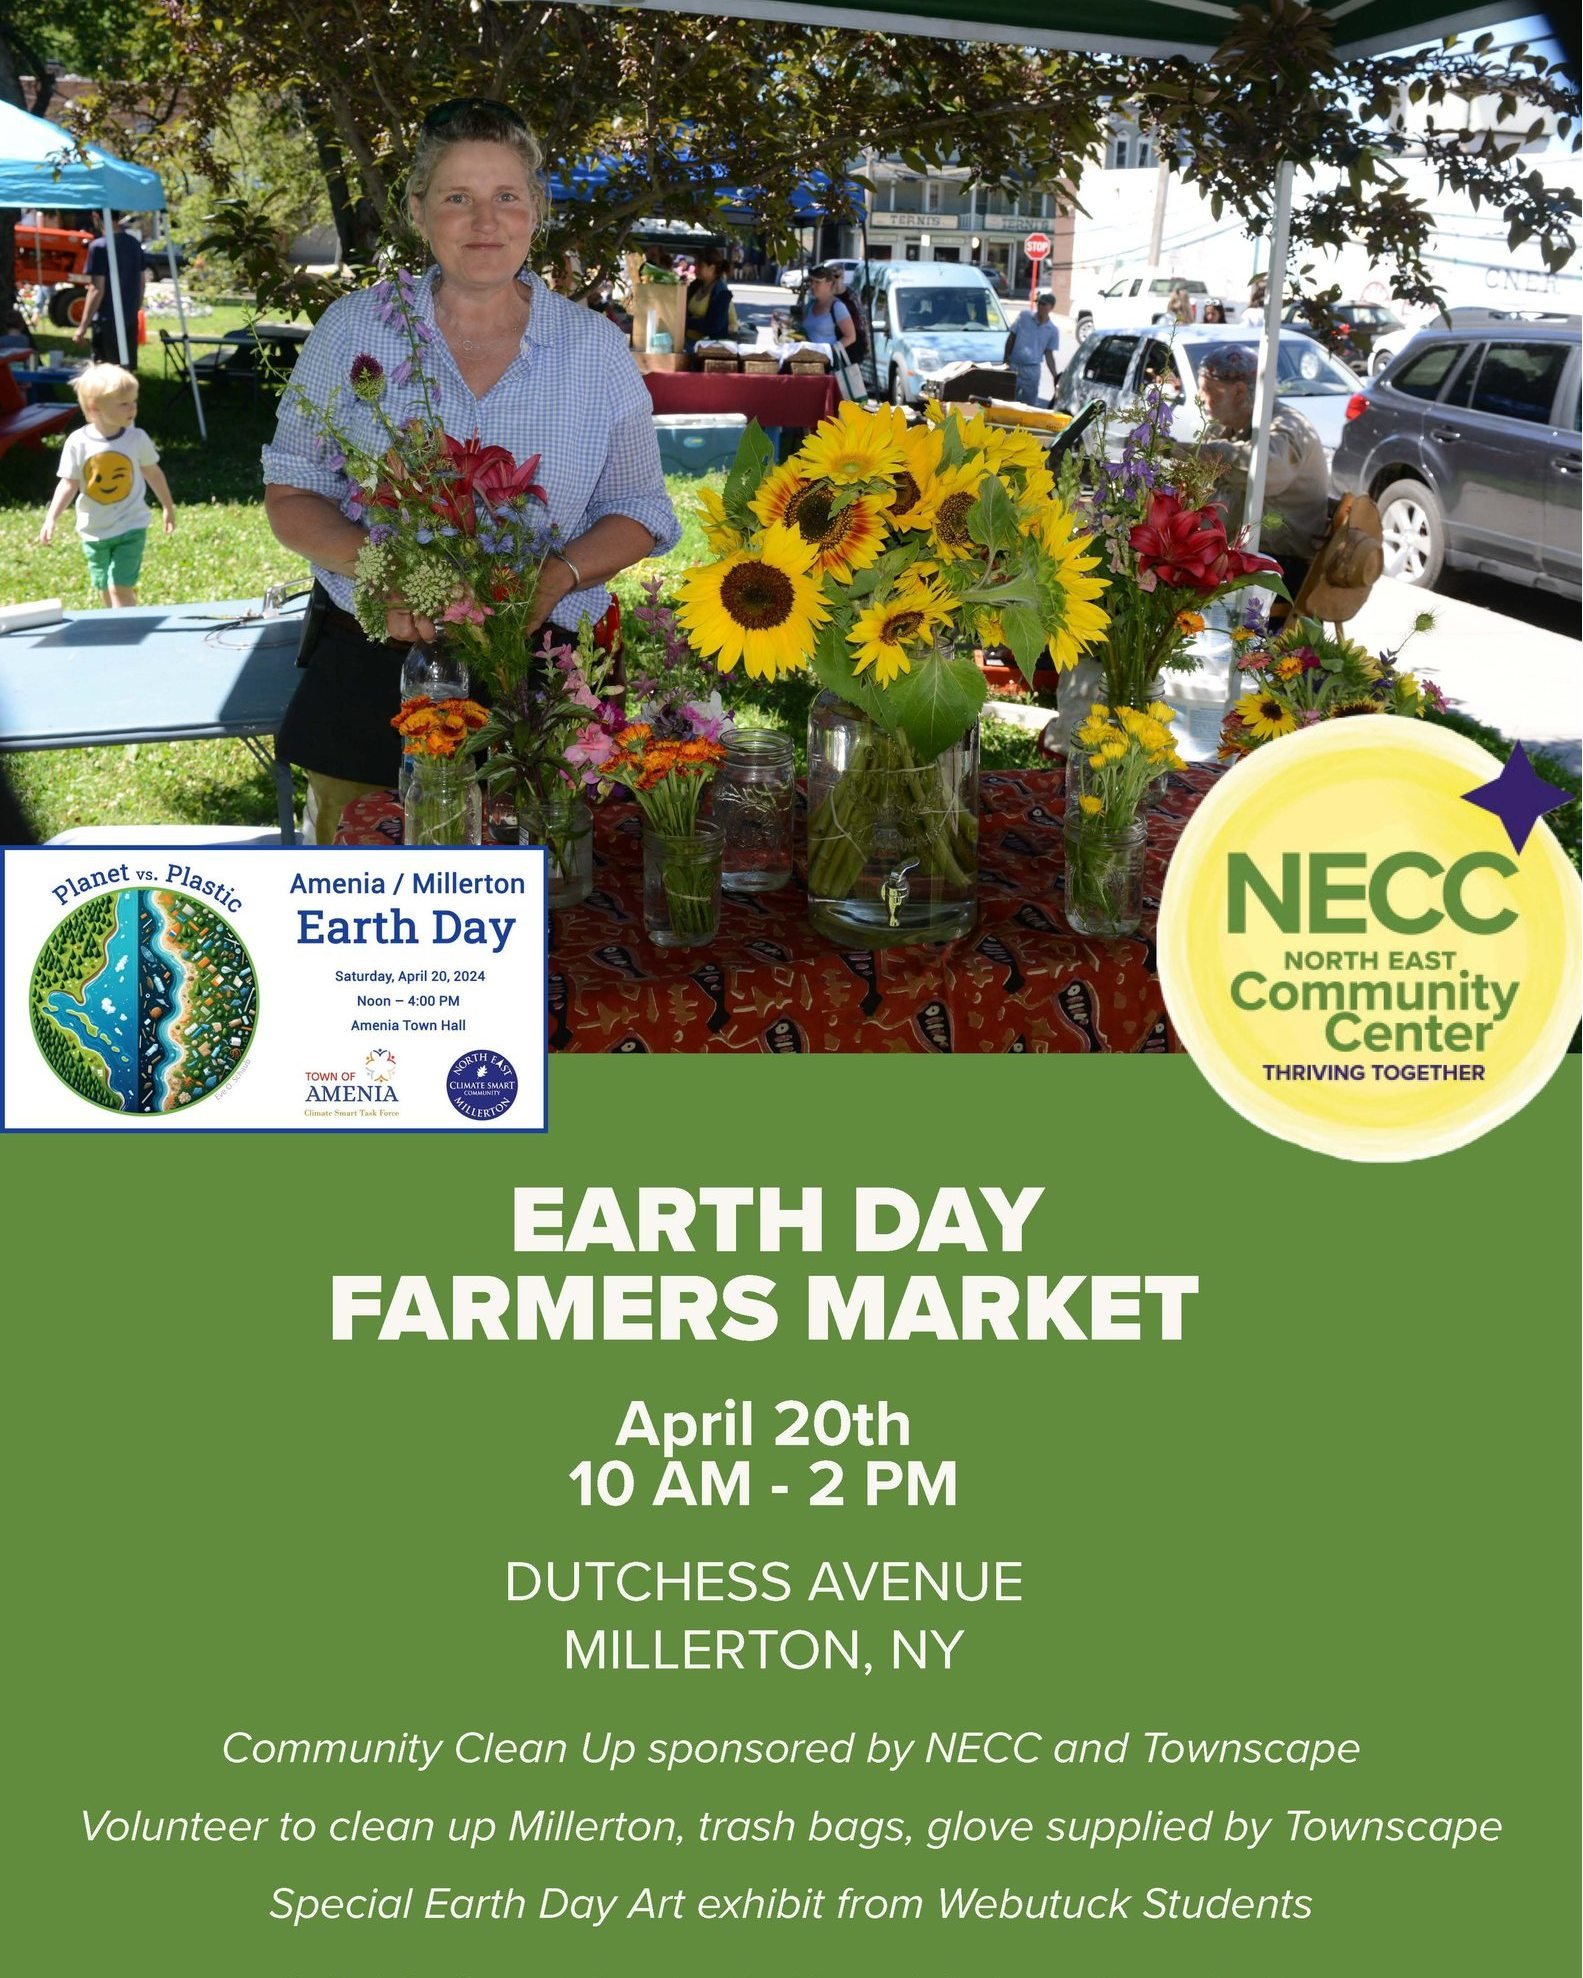 Come check out our celebration of Earth Day at the Farmers Market this Saturday!
We will have volunteer clean ups and a special exhibit from Webutuck Central School District students!

#NECC #farmersmarket #EarthDay2024 #dutchesscounty